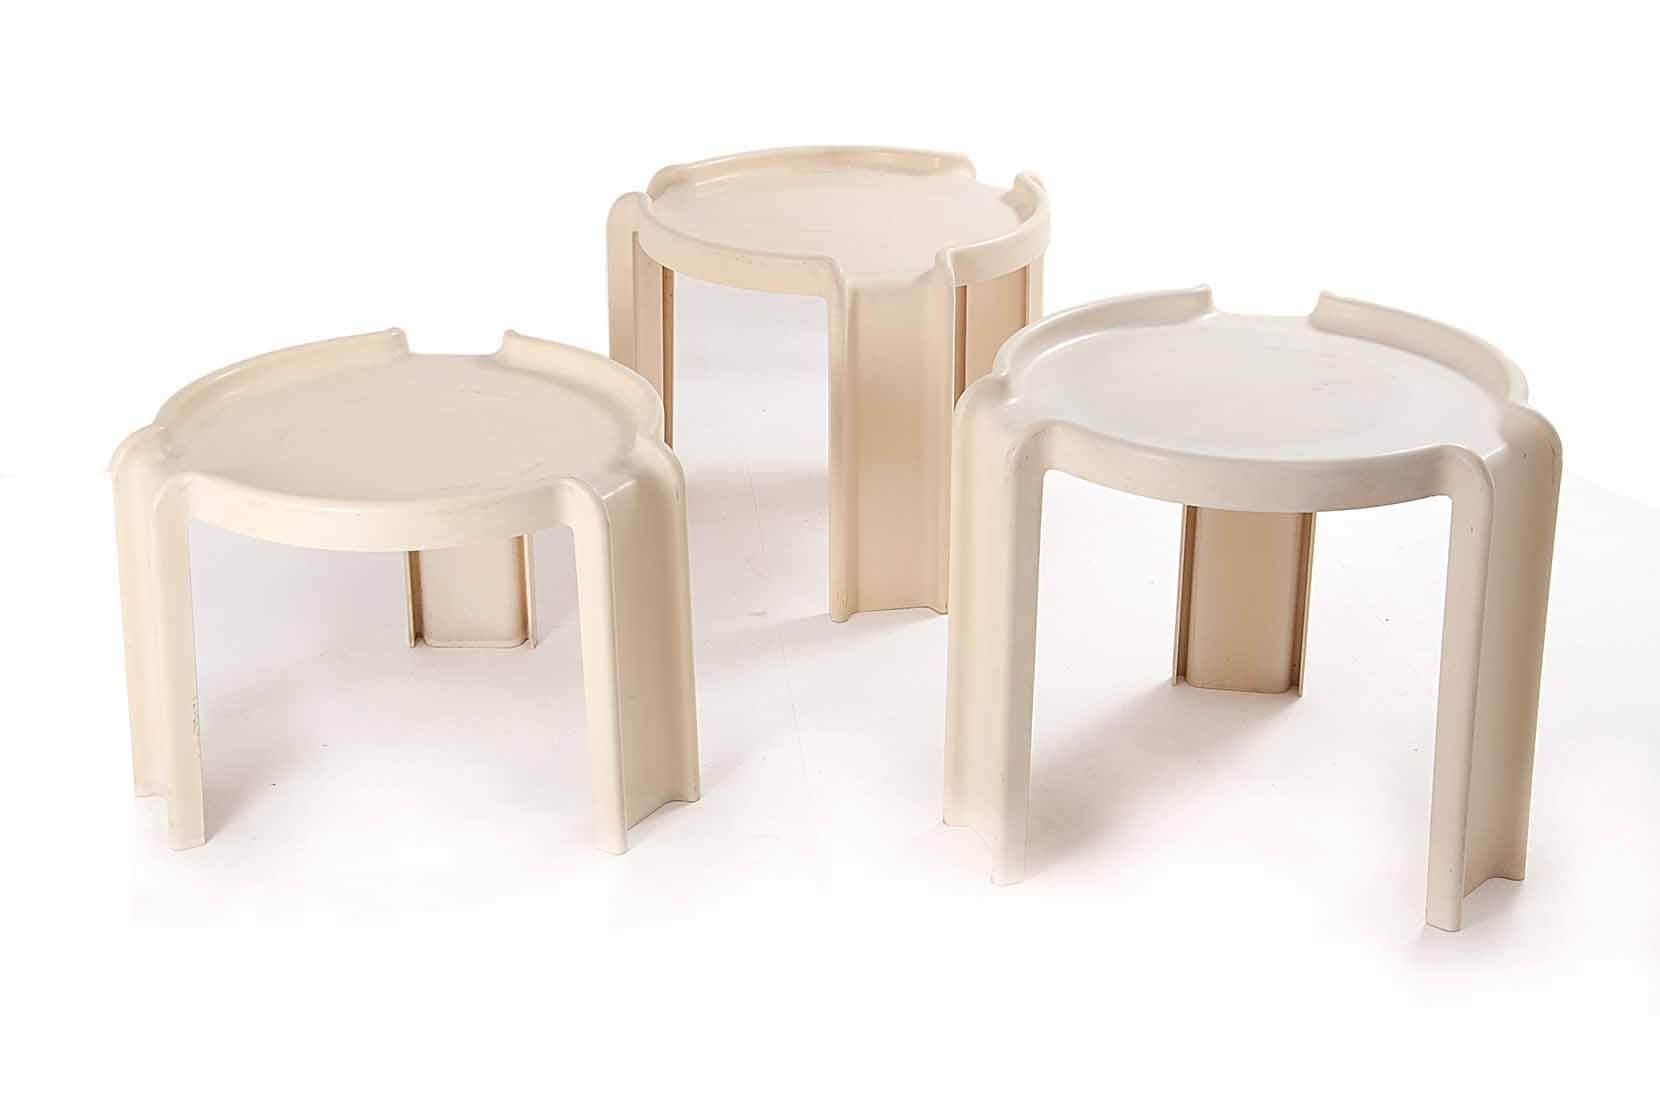 Mid-20th Century Nesting Tables by Giotto Stoppino for Kartell, Italy 1960, in White Color